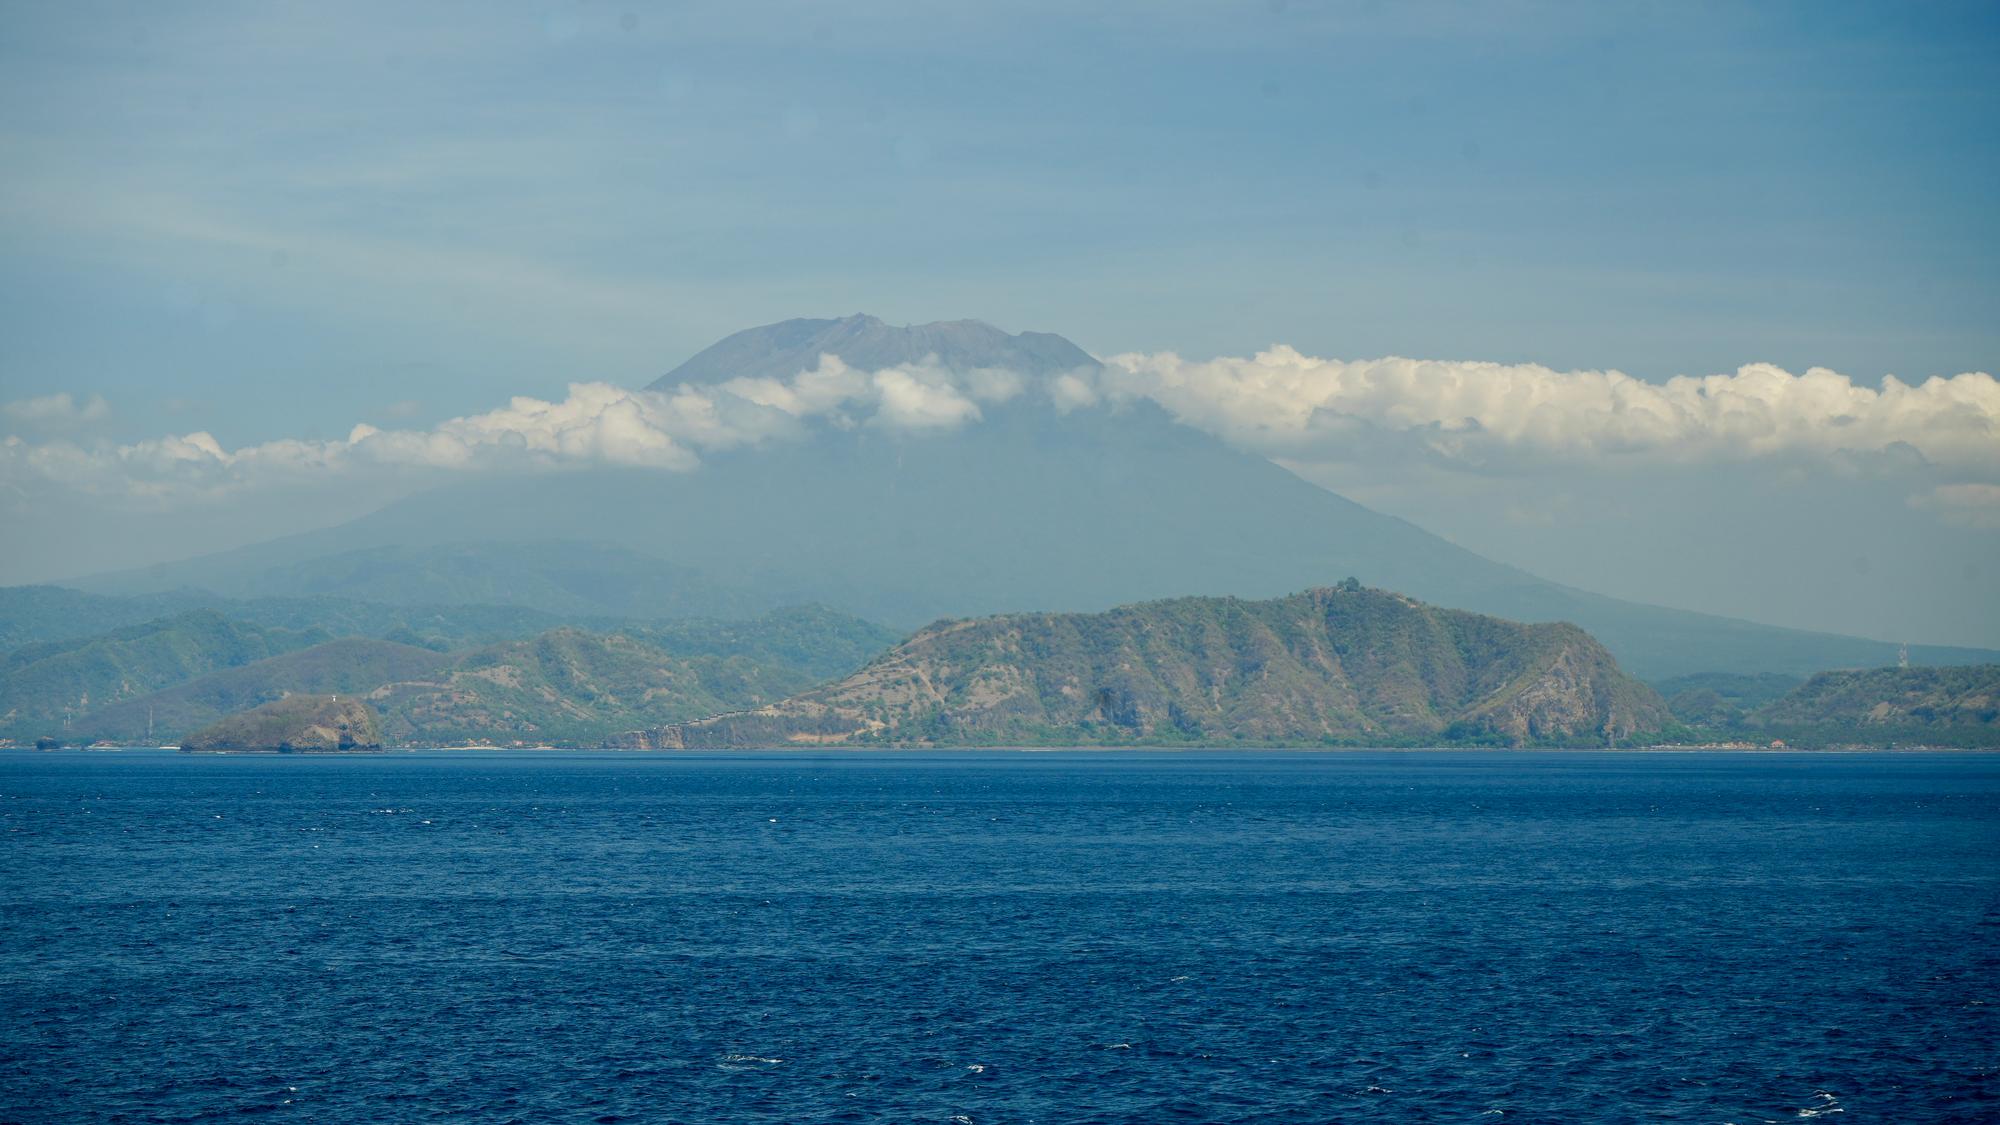 Bali volcano as seen from the ship